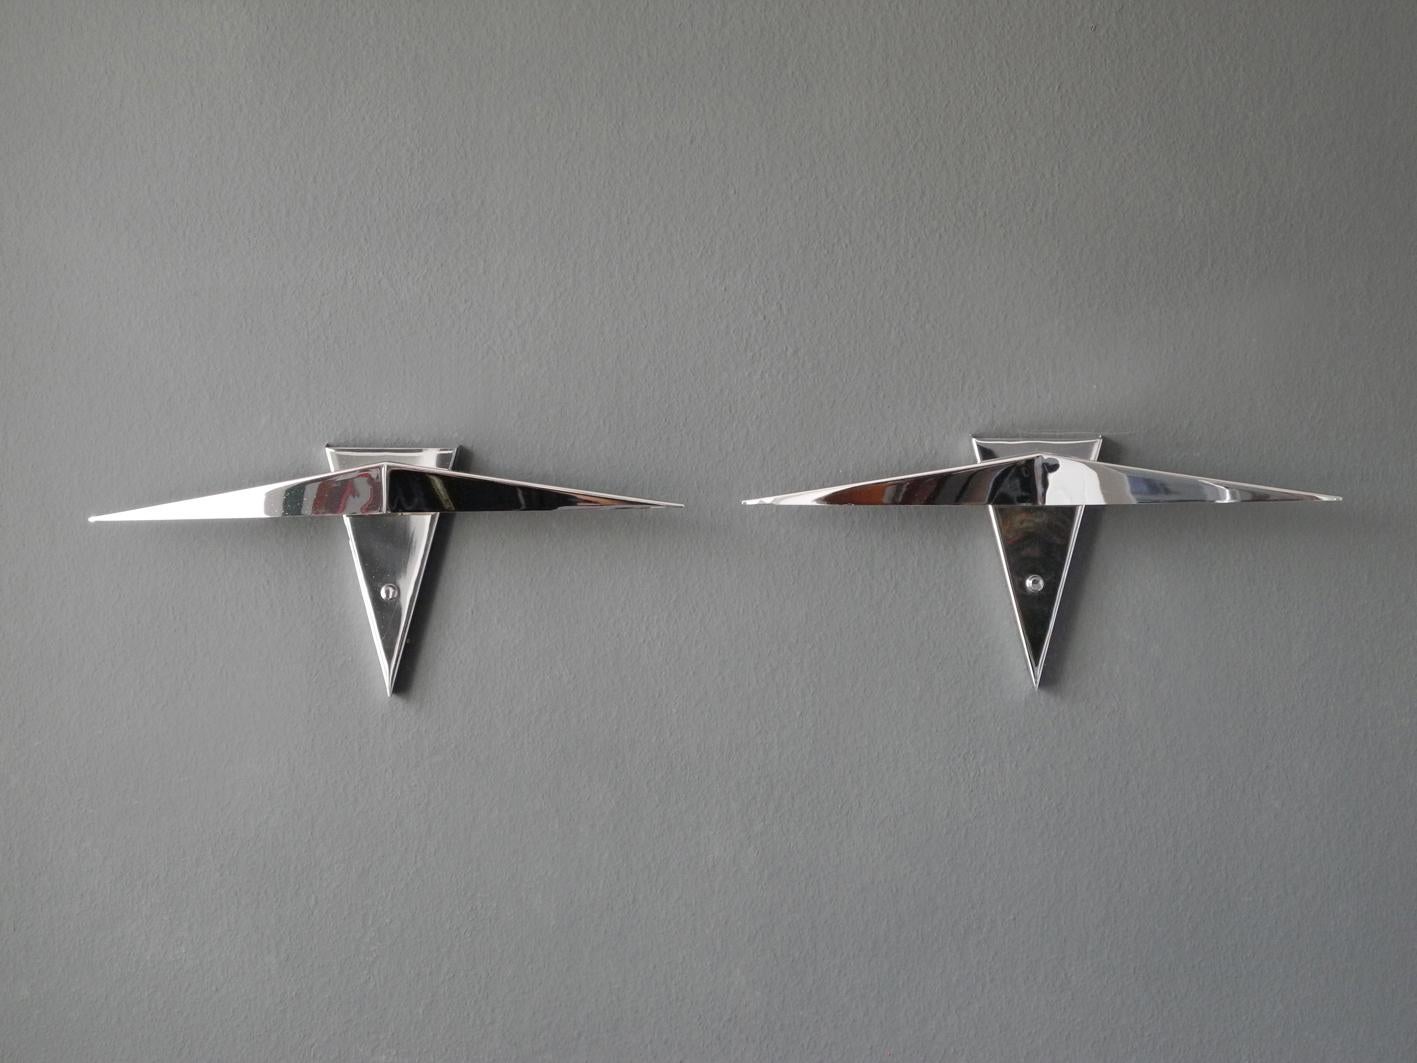 Pair of very rare 1980s XXL chrome halogen sconces. Very elegant postmodern design. Reminiscent of the radiator figures of the American cars of the 1950s. Lamps work with halogen light bulbs, with built-in dimmer.
Both lamps in very good condition